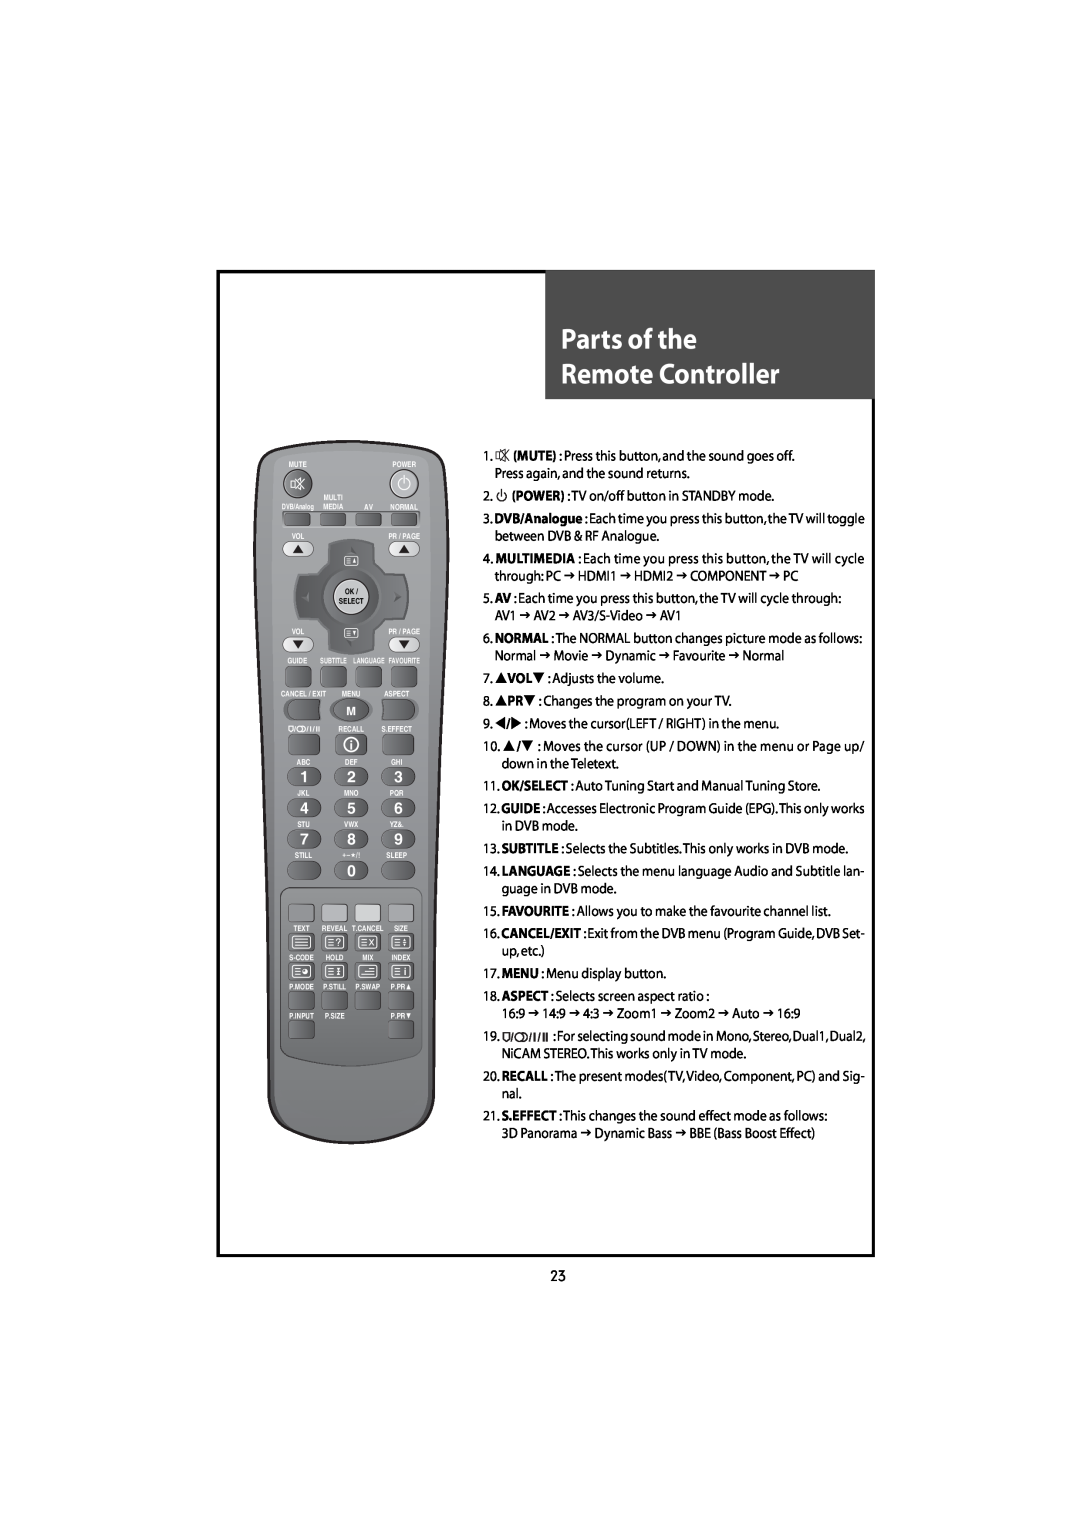 Daewoo DLT-42U1/G1HZ, DLT-42U1/G1FH, DLT-46U1FH, DLT-46U1HZ instruction manual Parts of the Remote Controller 